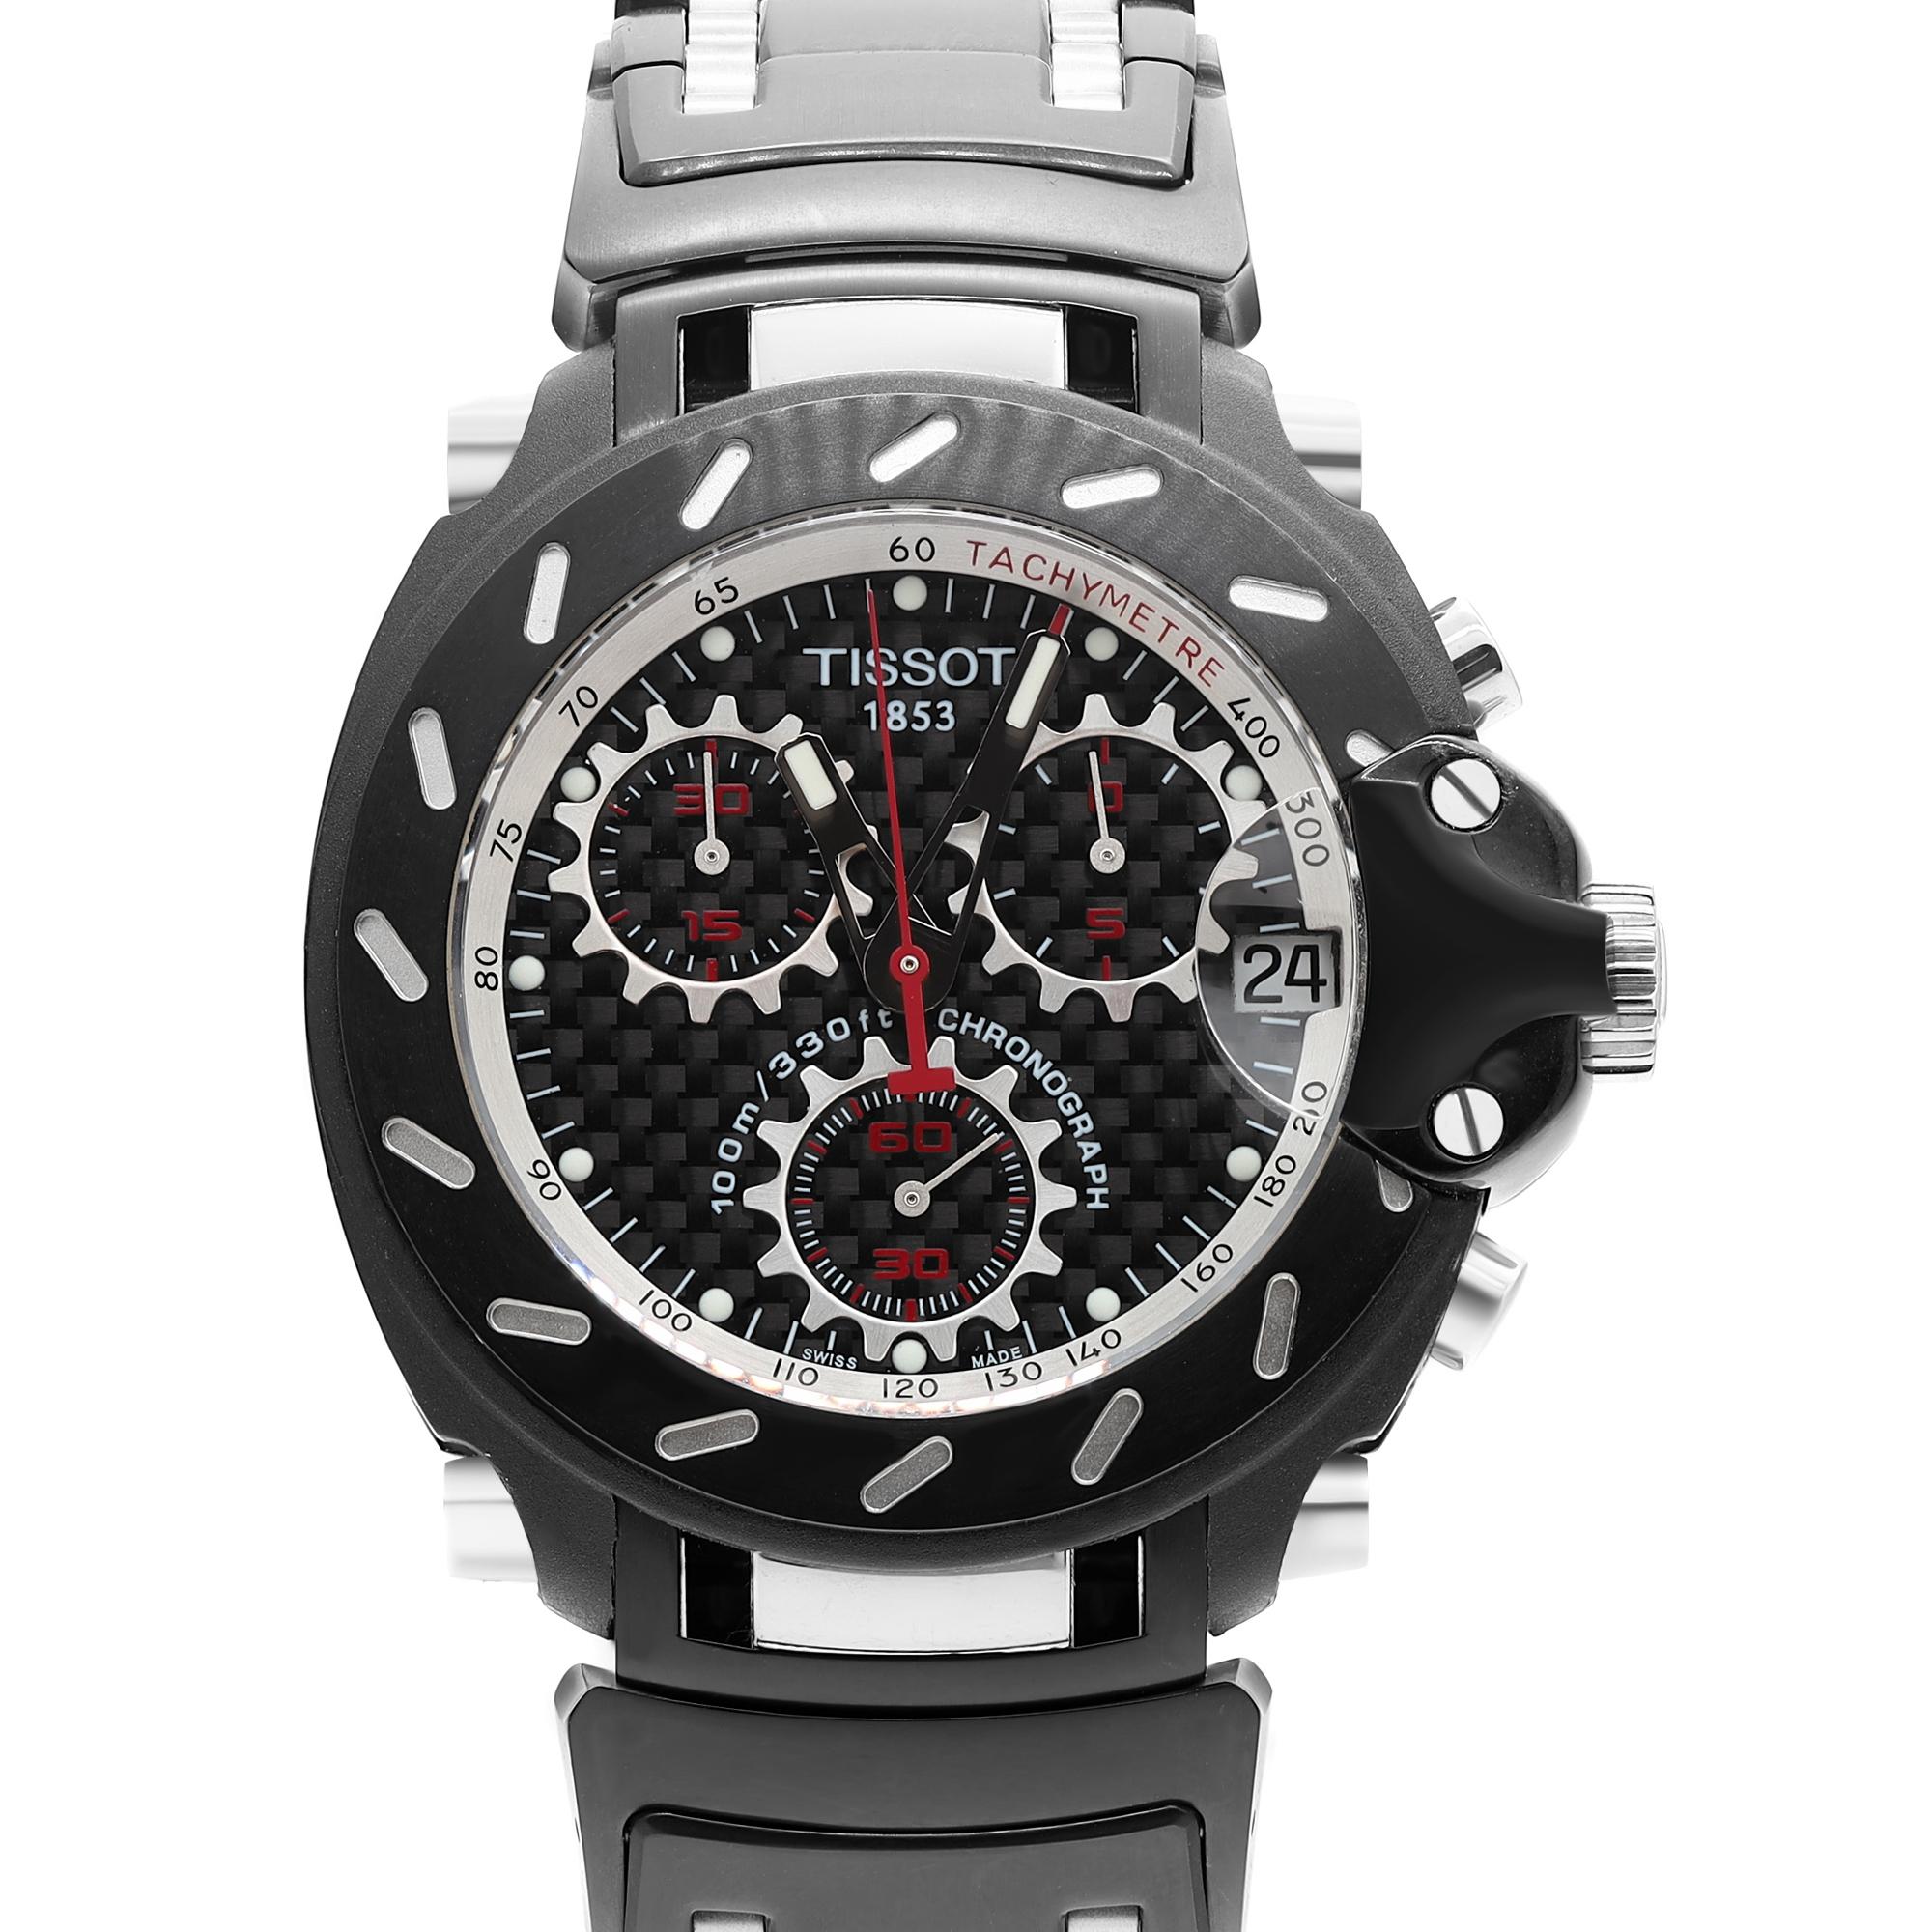 New with Defects Tissot T-Race Steel Chronograph Black Carbon Dial Men's Watch T011.417.22.201.00. The Watch has a few Tiny Marks and  Dents on the Case Side. Quartz (Battery) Movement powers this Beautiful Timepiece And Features: Round Black PVD